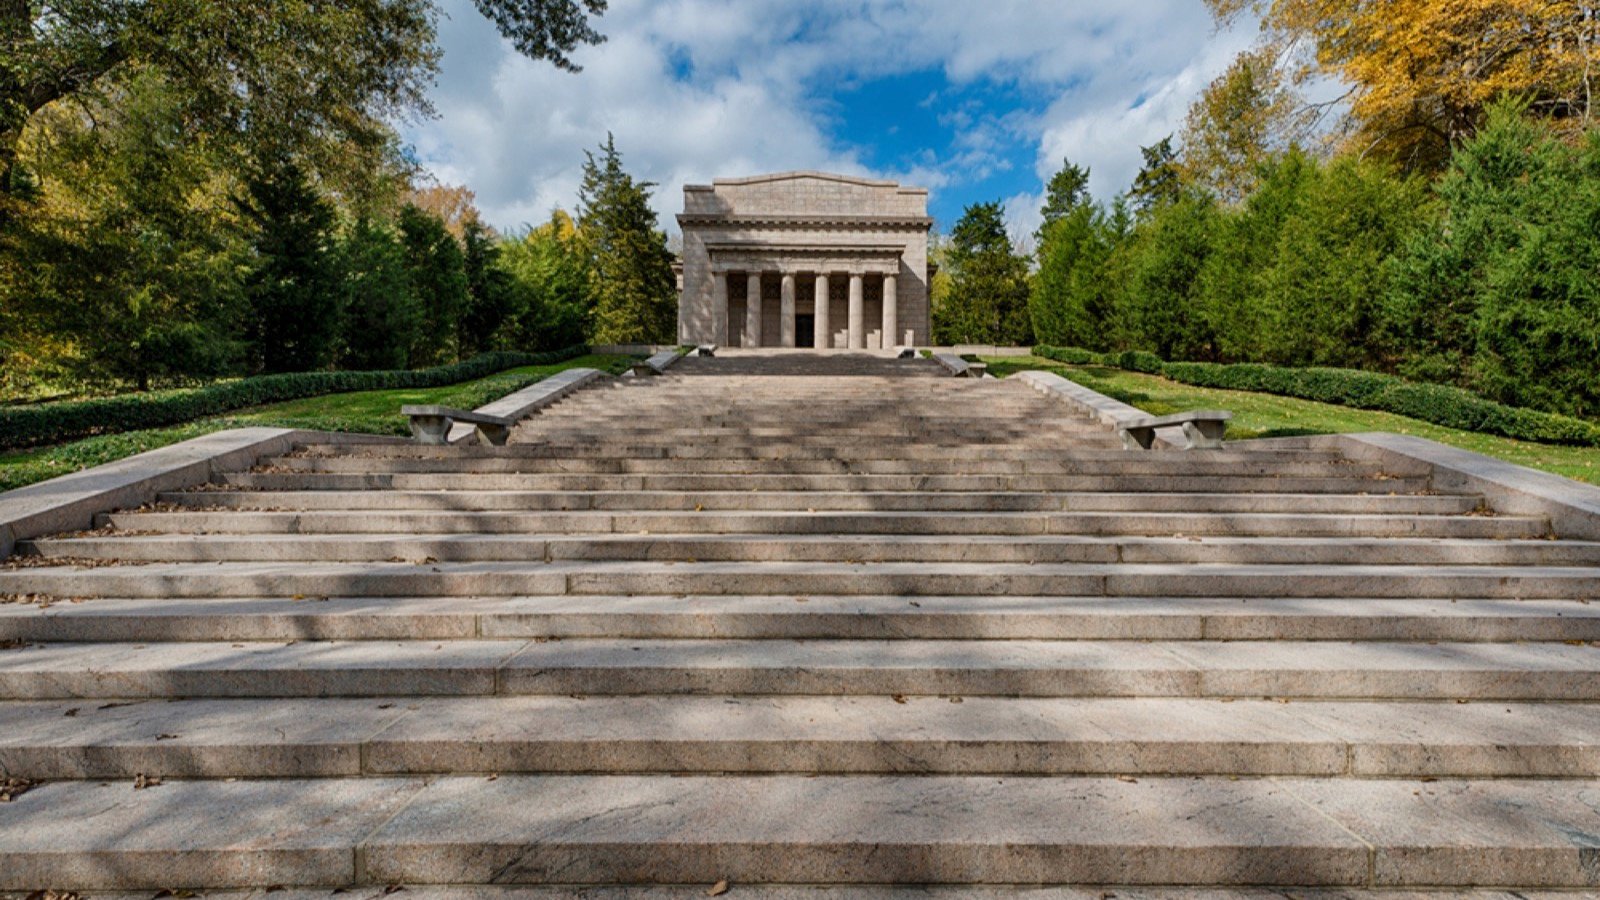 <p>The Abraham Lincoln Birthplace National Historic Park has two farm sites in LaRue County, where Abraham Lincoln was born. Around the park are picnic areas and scenic hiking trails. The park rangers are helpful and knowledgeable to visitors wishing to learn more about the 16th President of the U.S.</p>